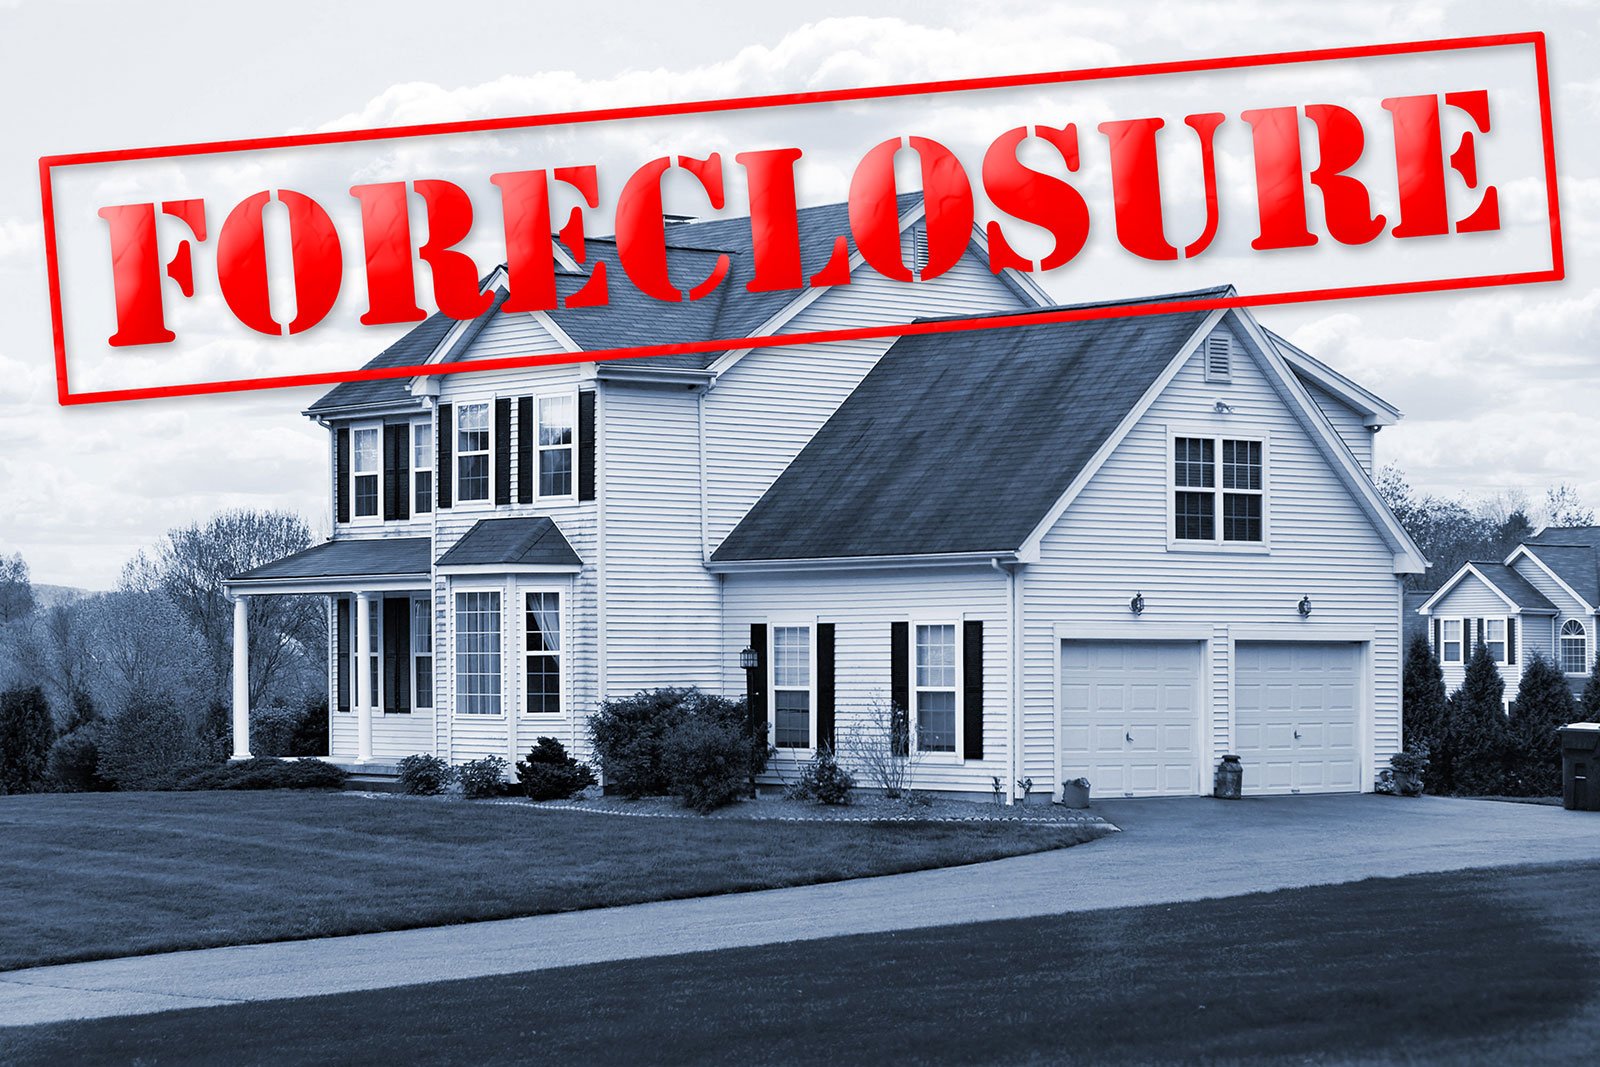 How to Sell My House Fast for Cash When Facing Foreclosure